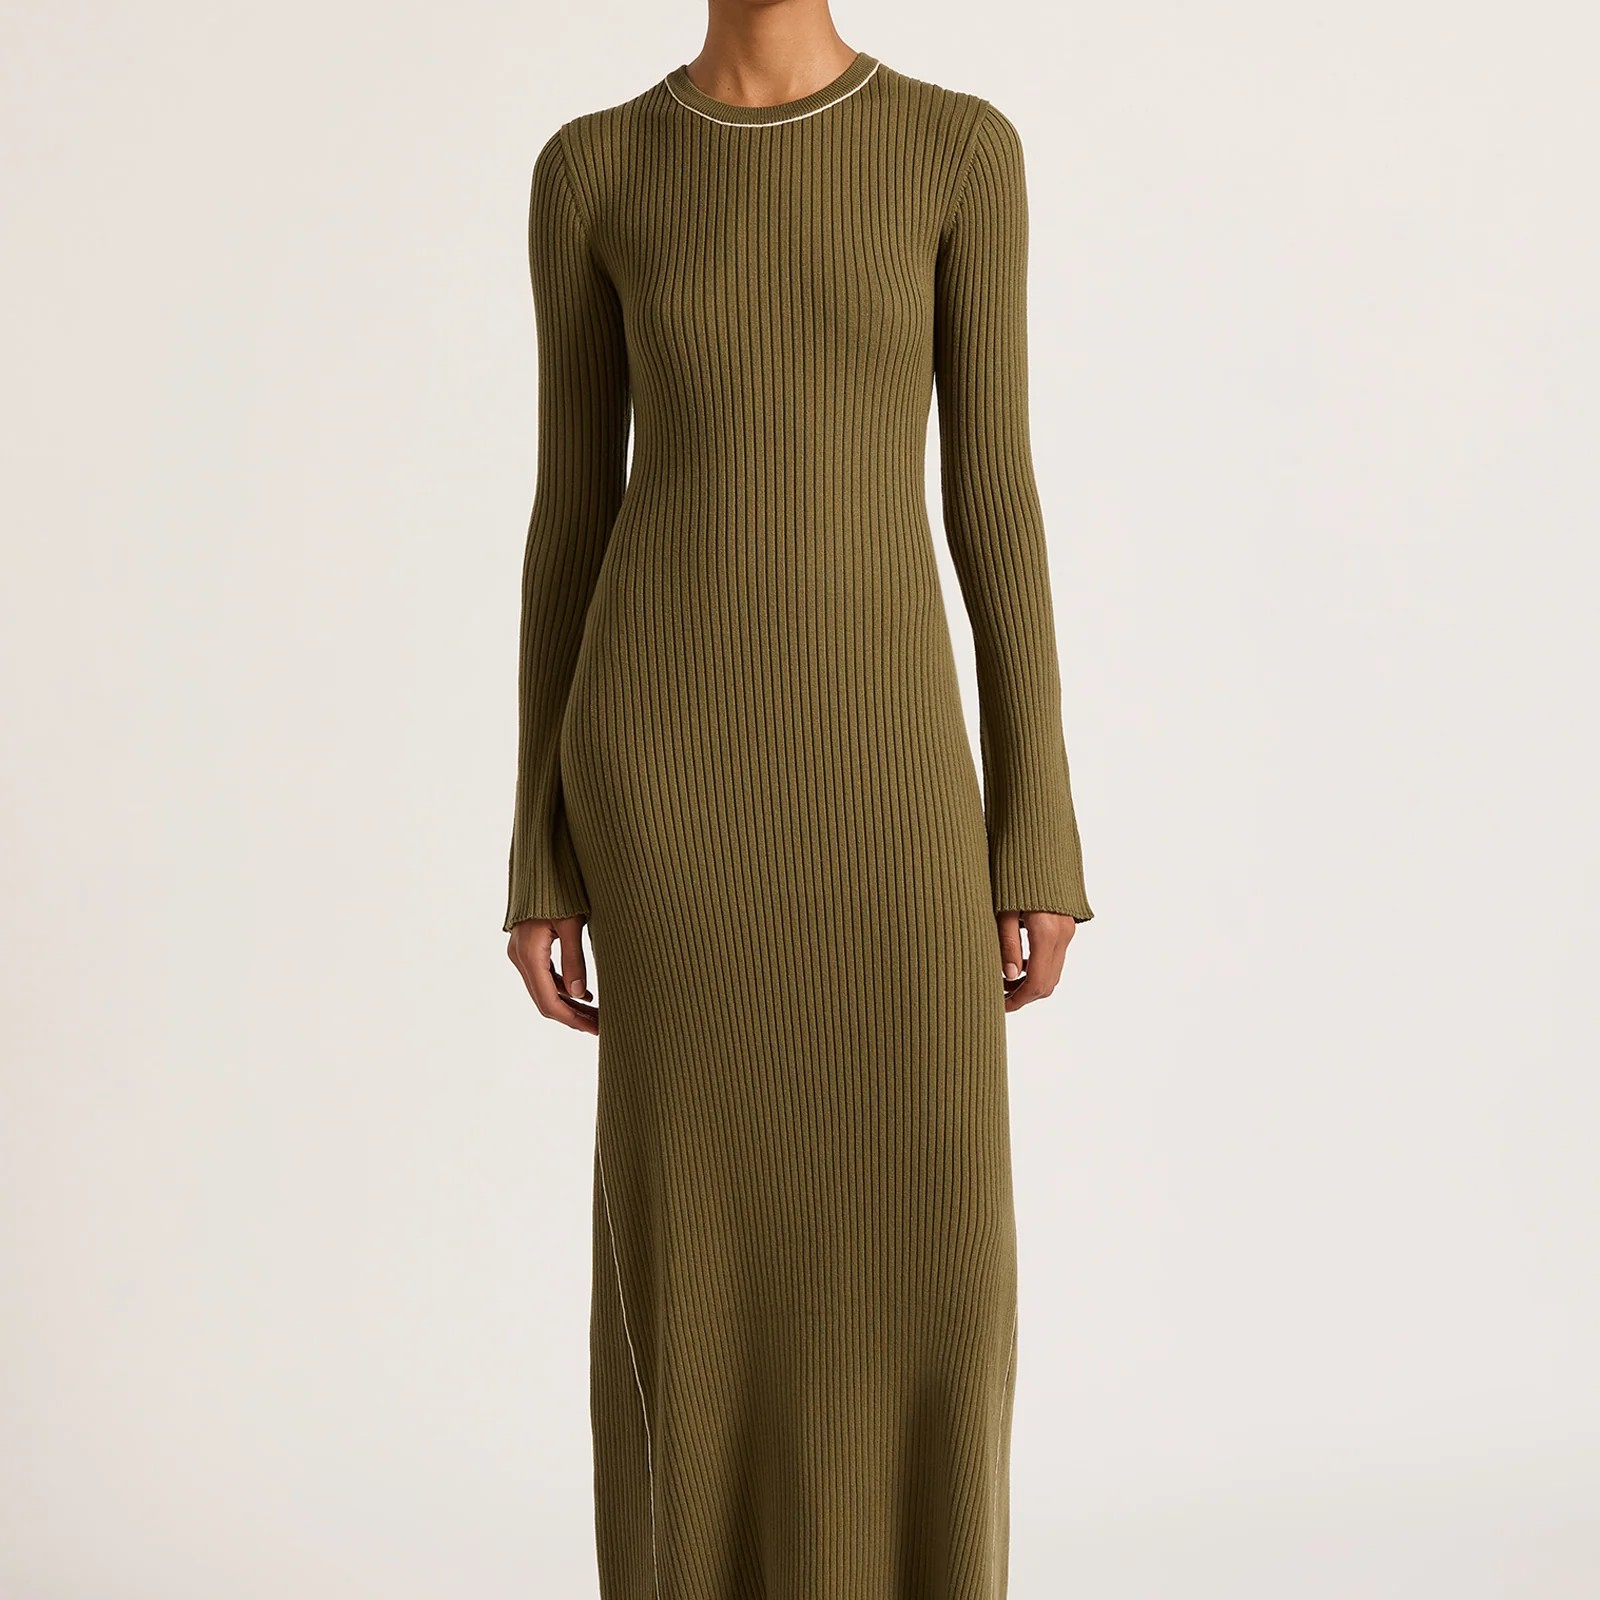 Gaia Knit Maxi Dress - Olive-Nude Lucy-Lot 39 Store & Cafe